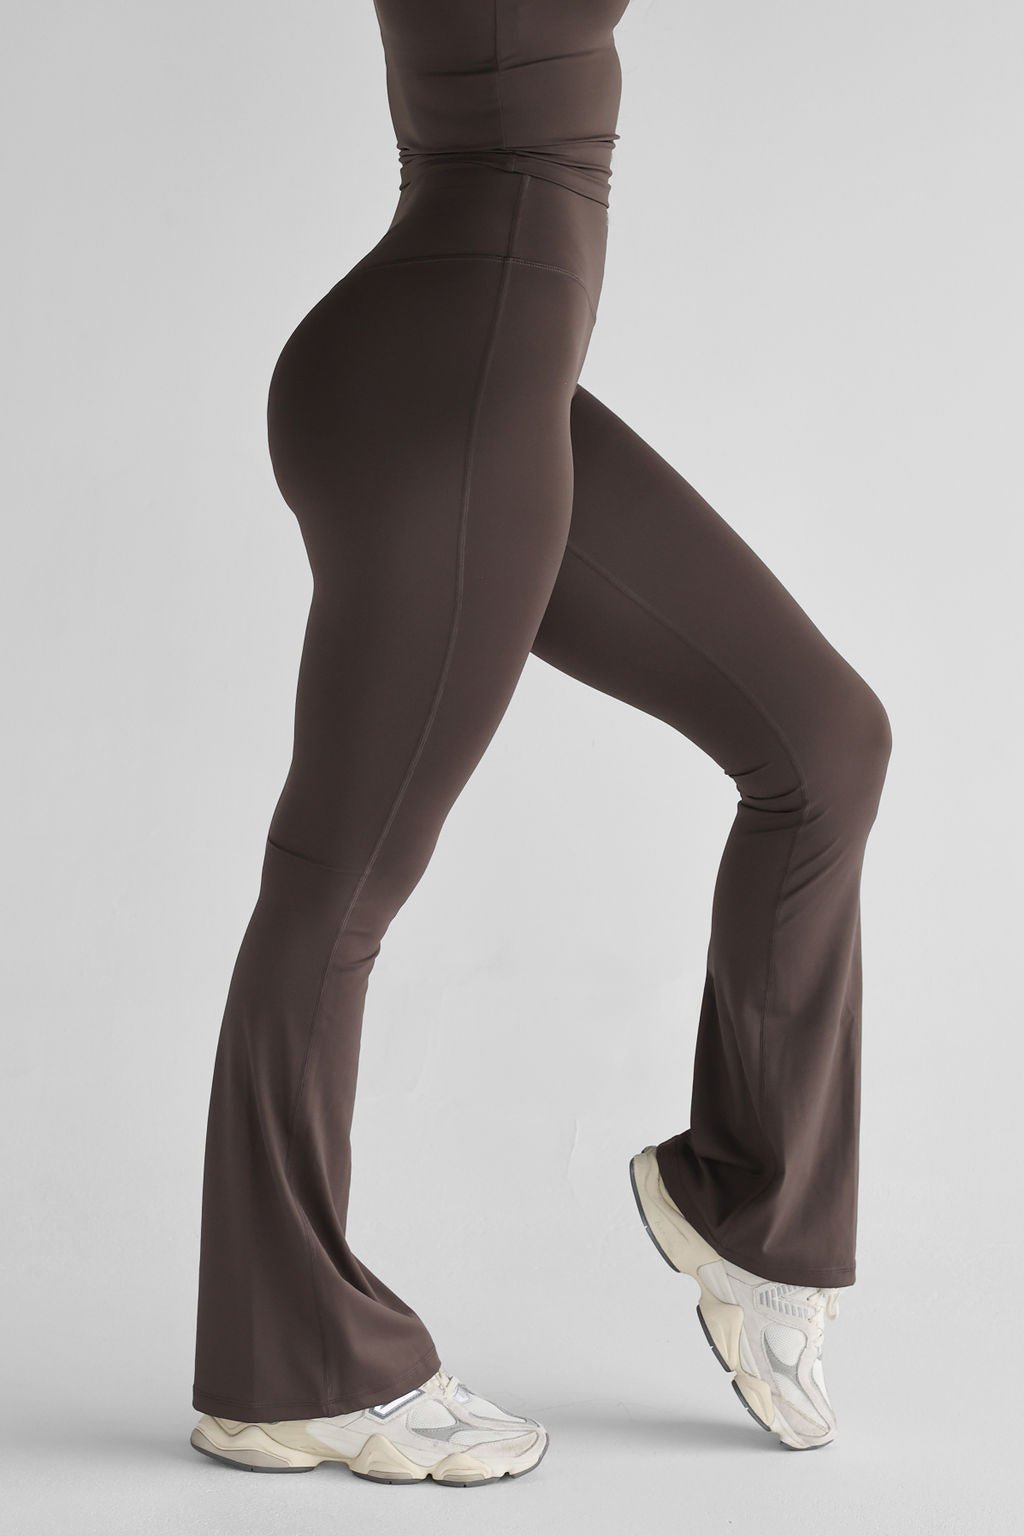 SCULPT Flare Leggings - Dark Chocolate, High Waisted, Squat Proof, 5 Star  Rated